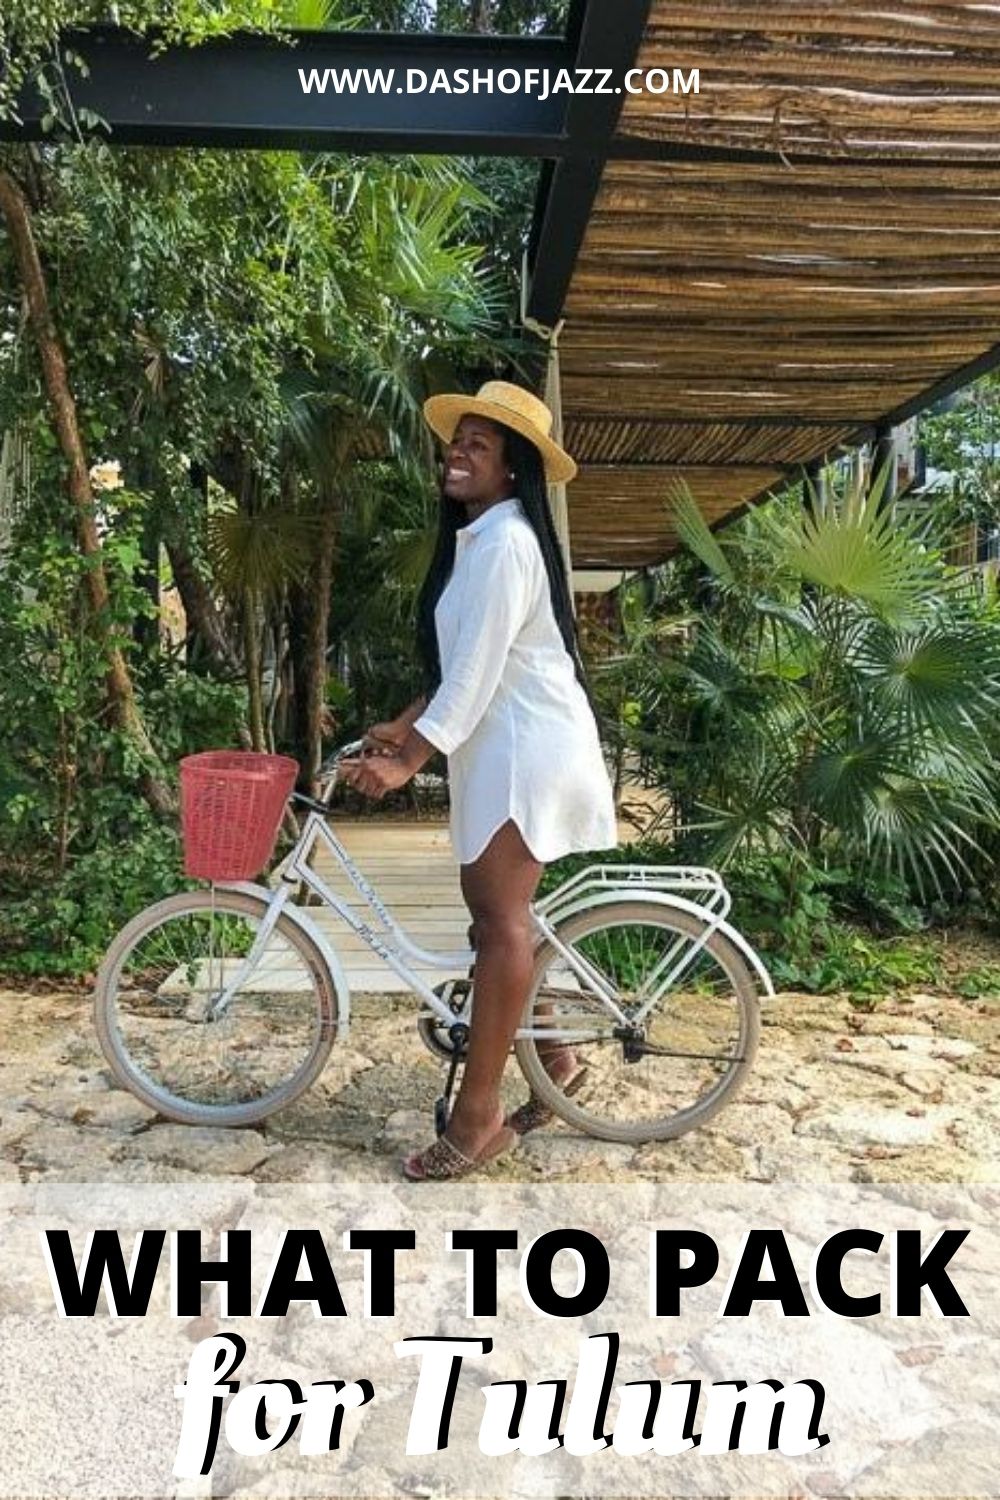 Jazzmine on bicycle with text overlay "what to pack for Tulum"